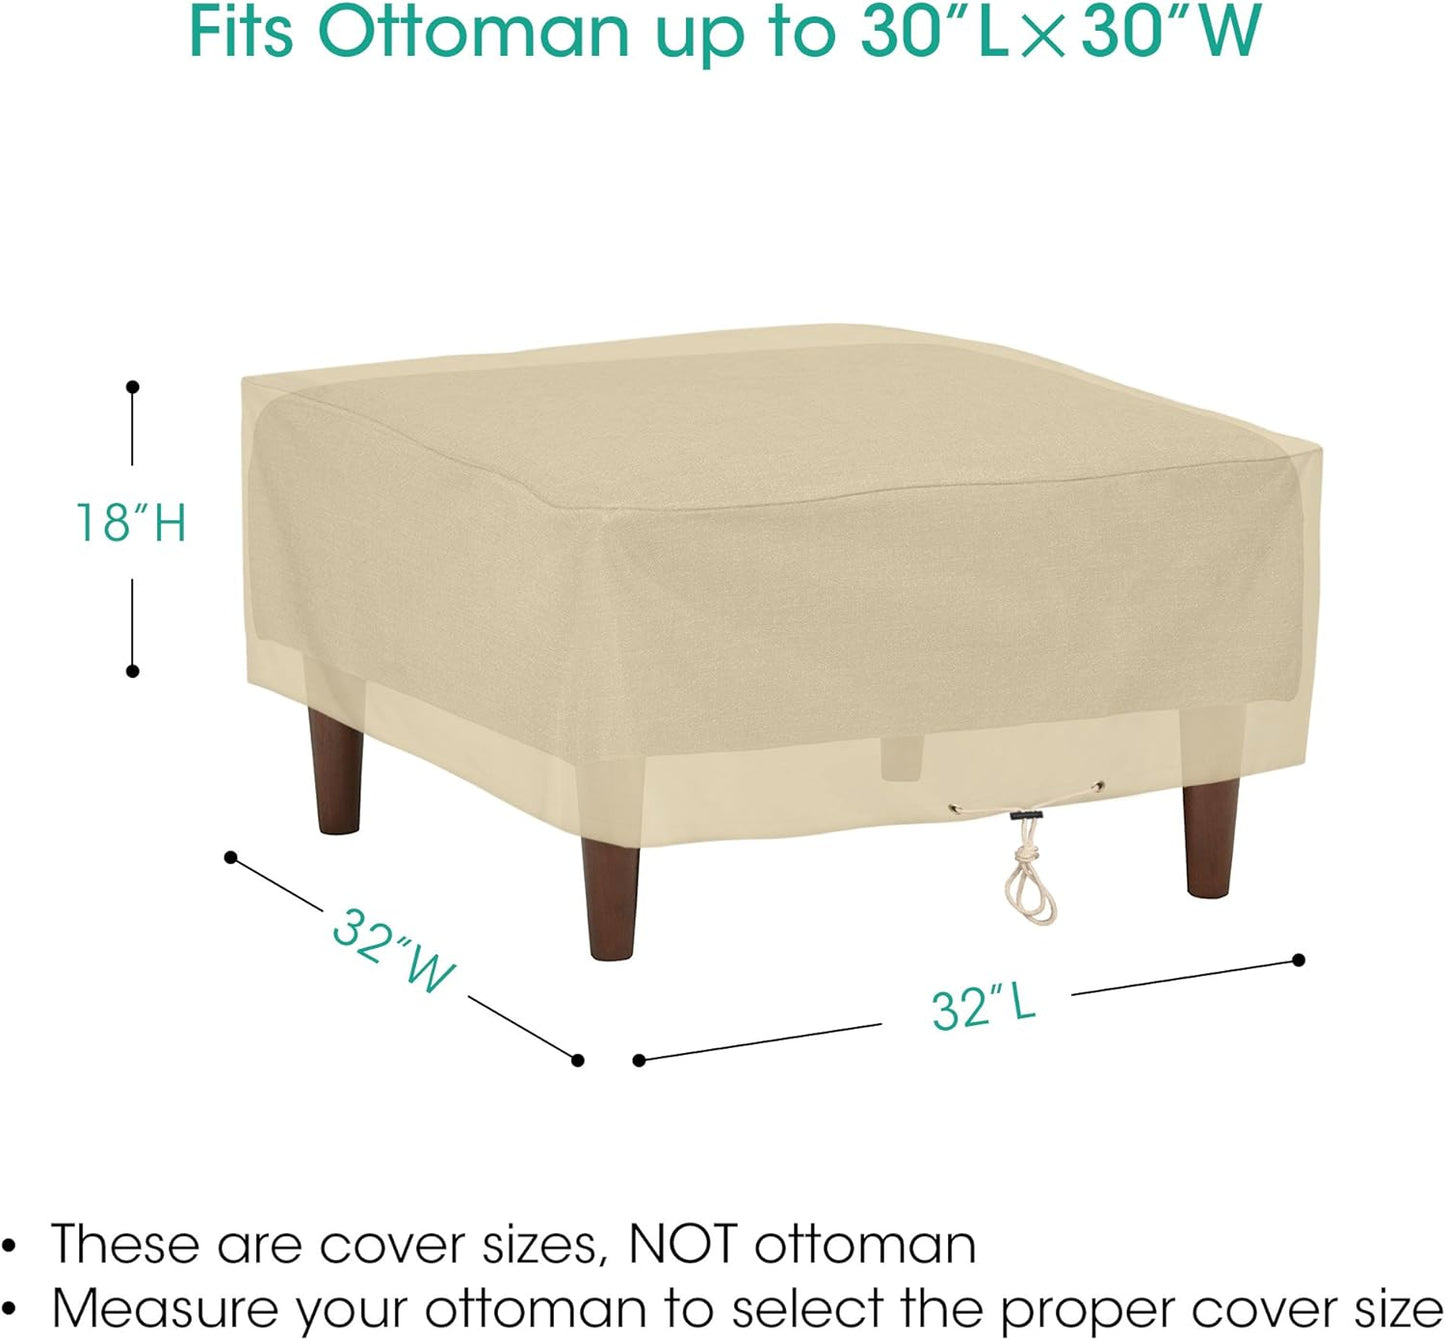 "Beige Waterproof Outdoor Ottoman Cover: Heavy Duty, All-Weather Protection, 32" x 32" x 18""